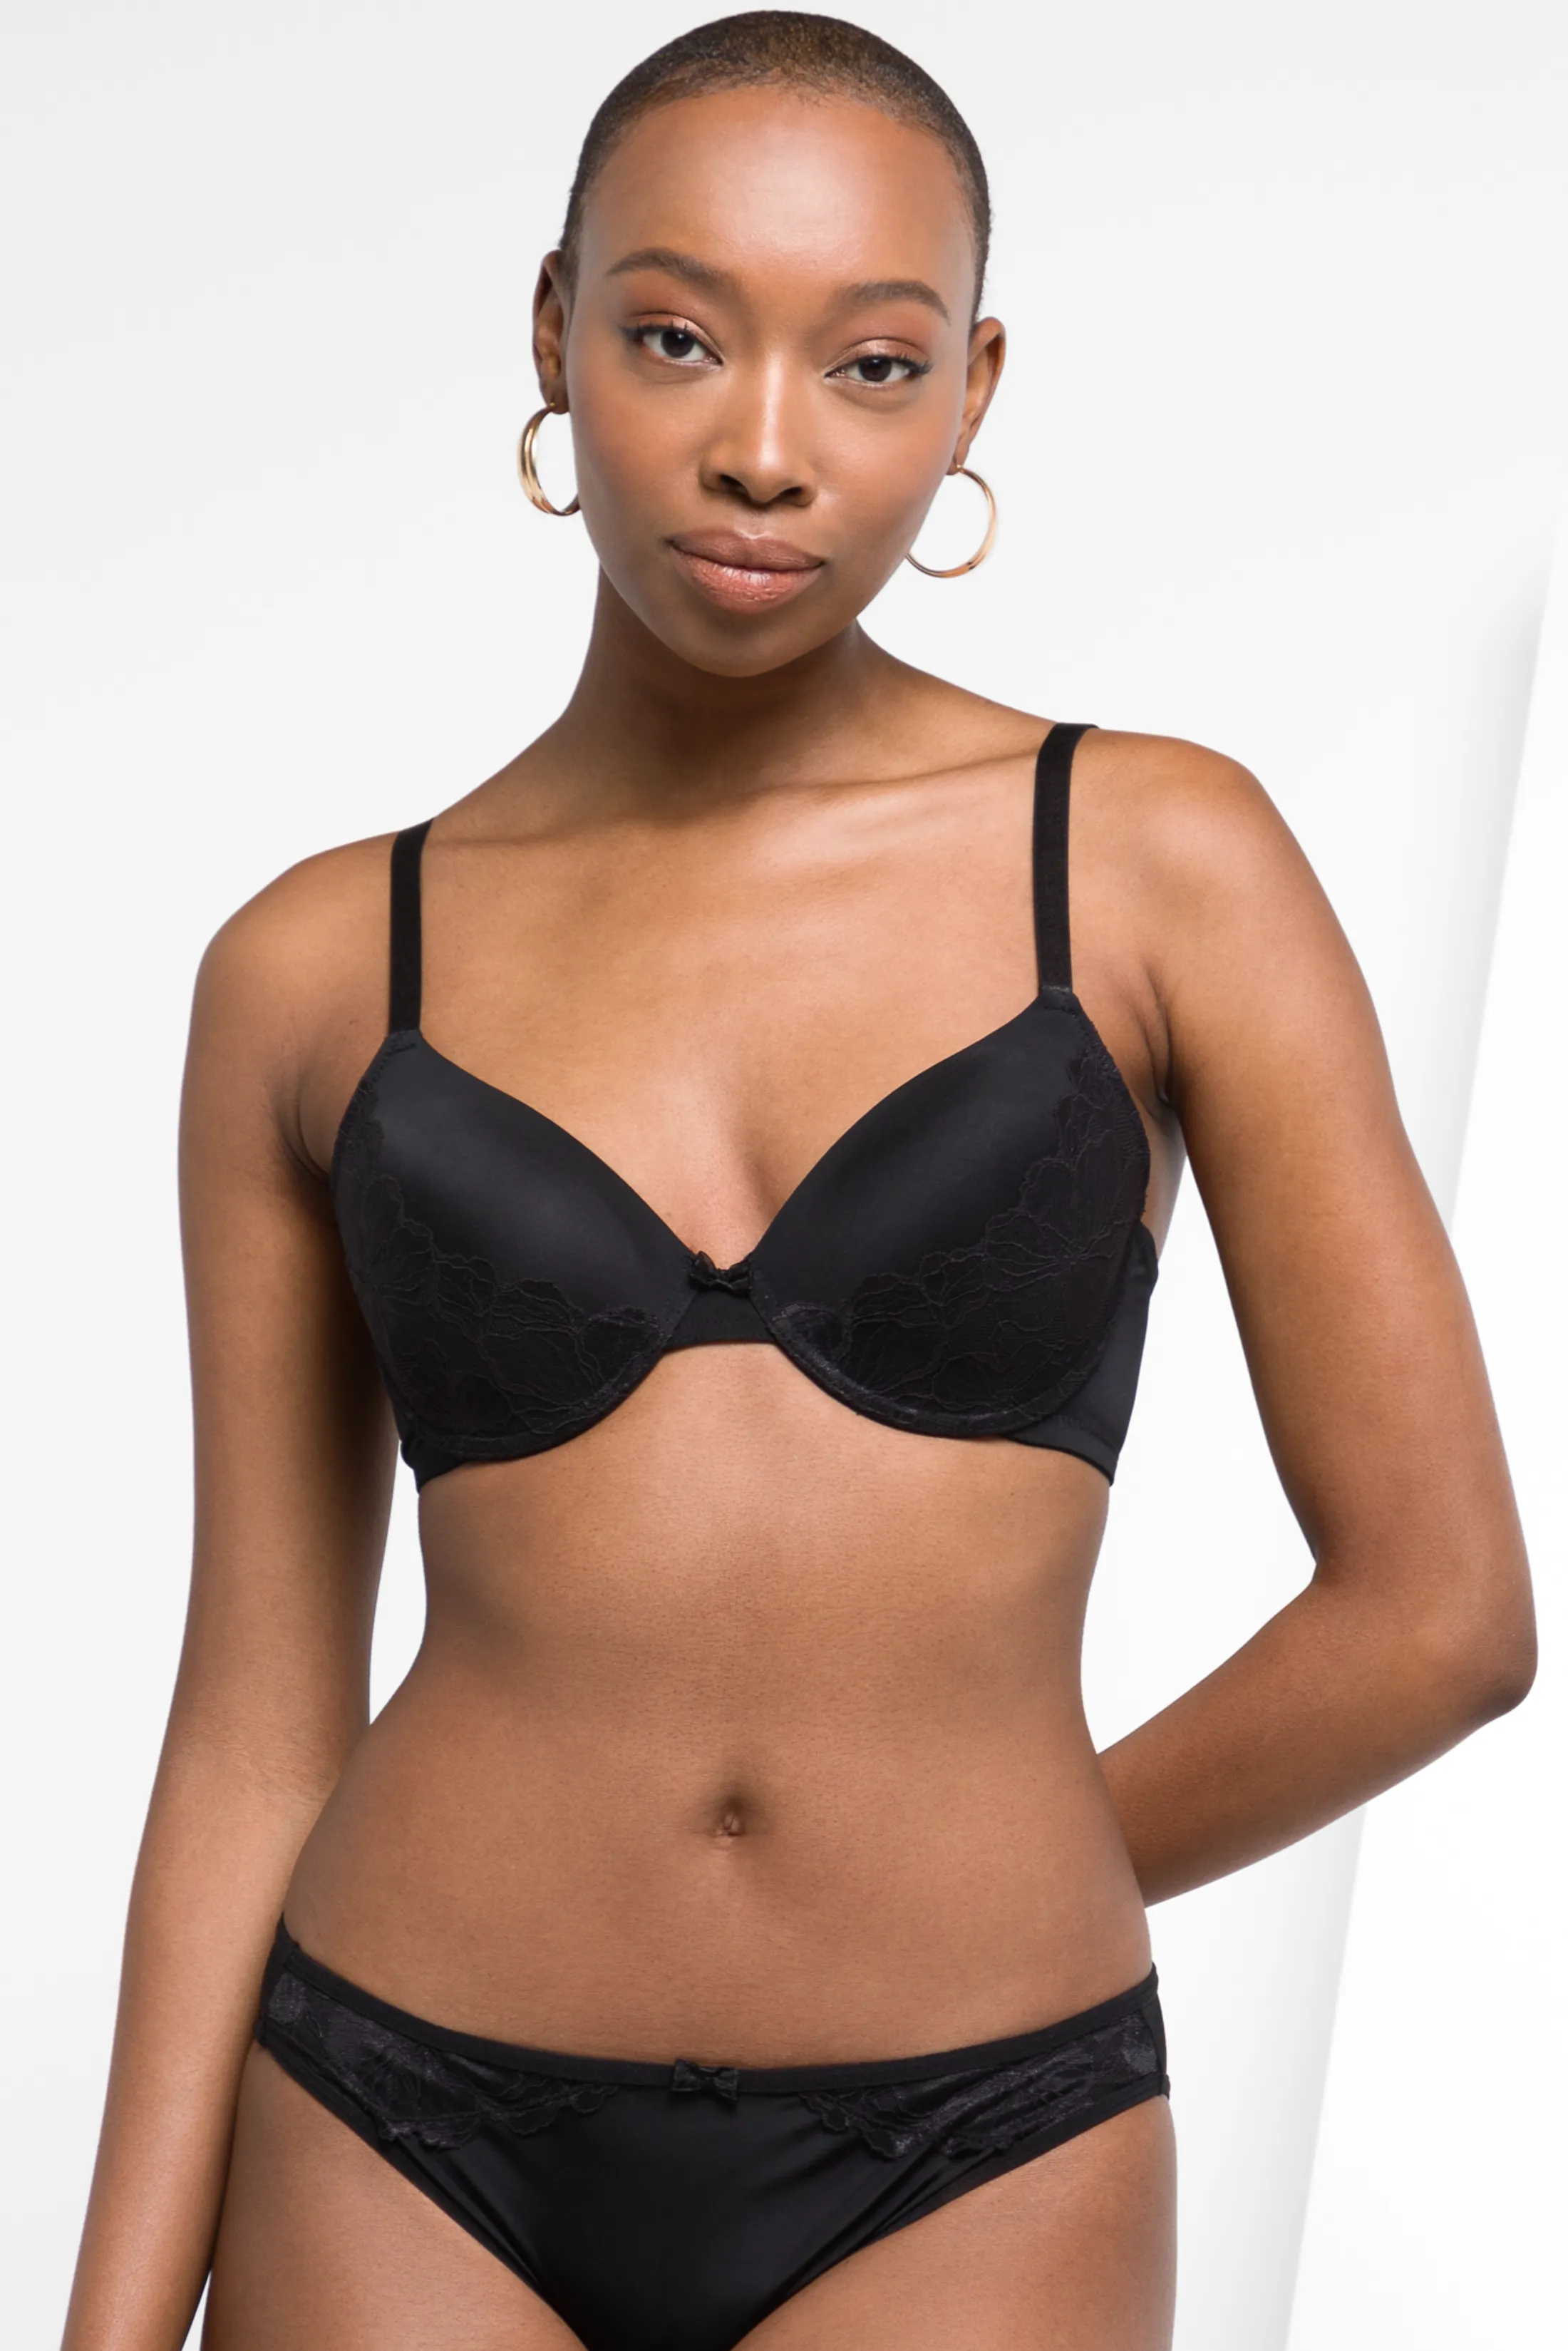 Ackermans - Ladies, we now have selected bra styles in sizes up to G, so  you can feel 100% confident in the perfect fit. Get 2-pack perfect fit bras,  from only 119.95